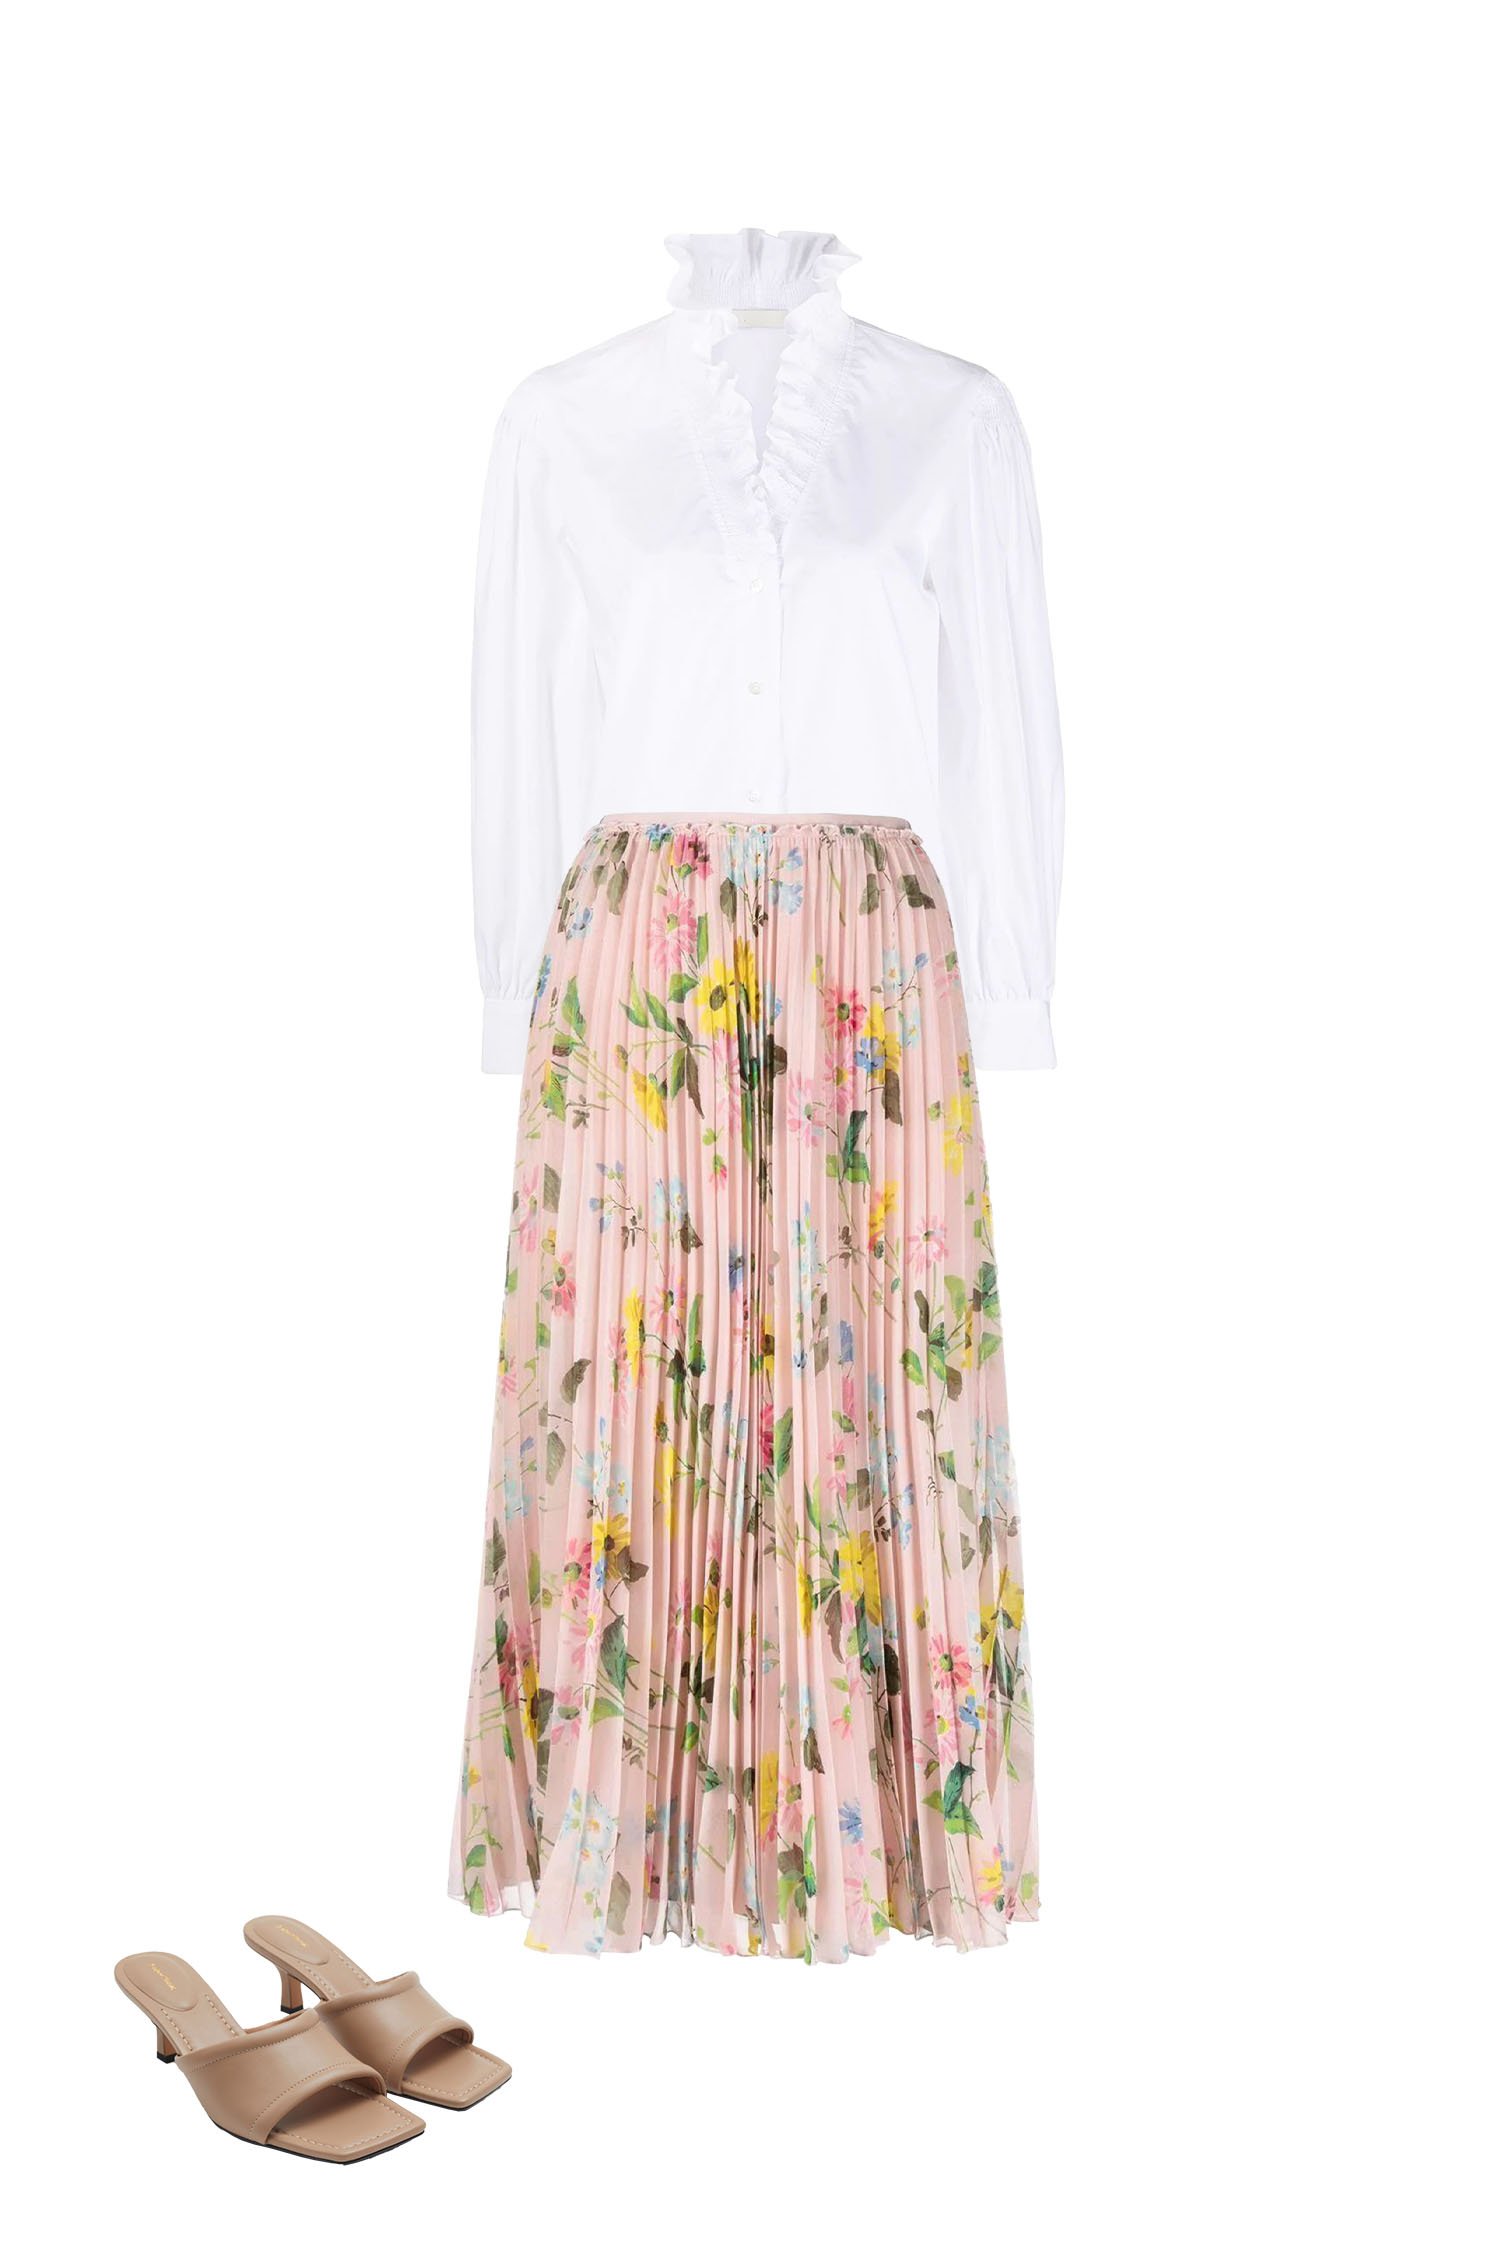 Pink Floral Pleated Skirt with White Ruffle Neck and Blouse Beige Square Toe Heeled Sandals